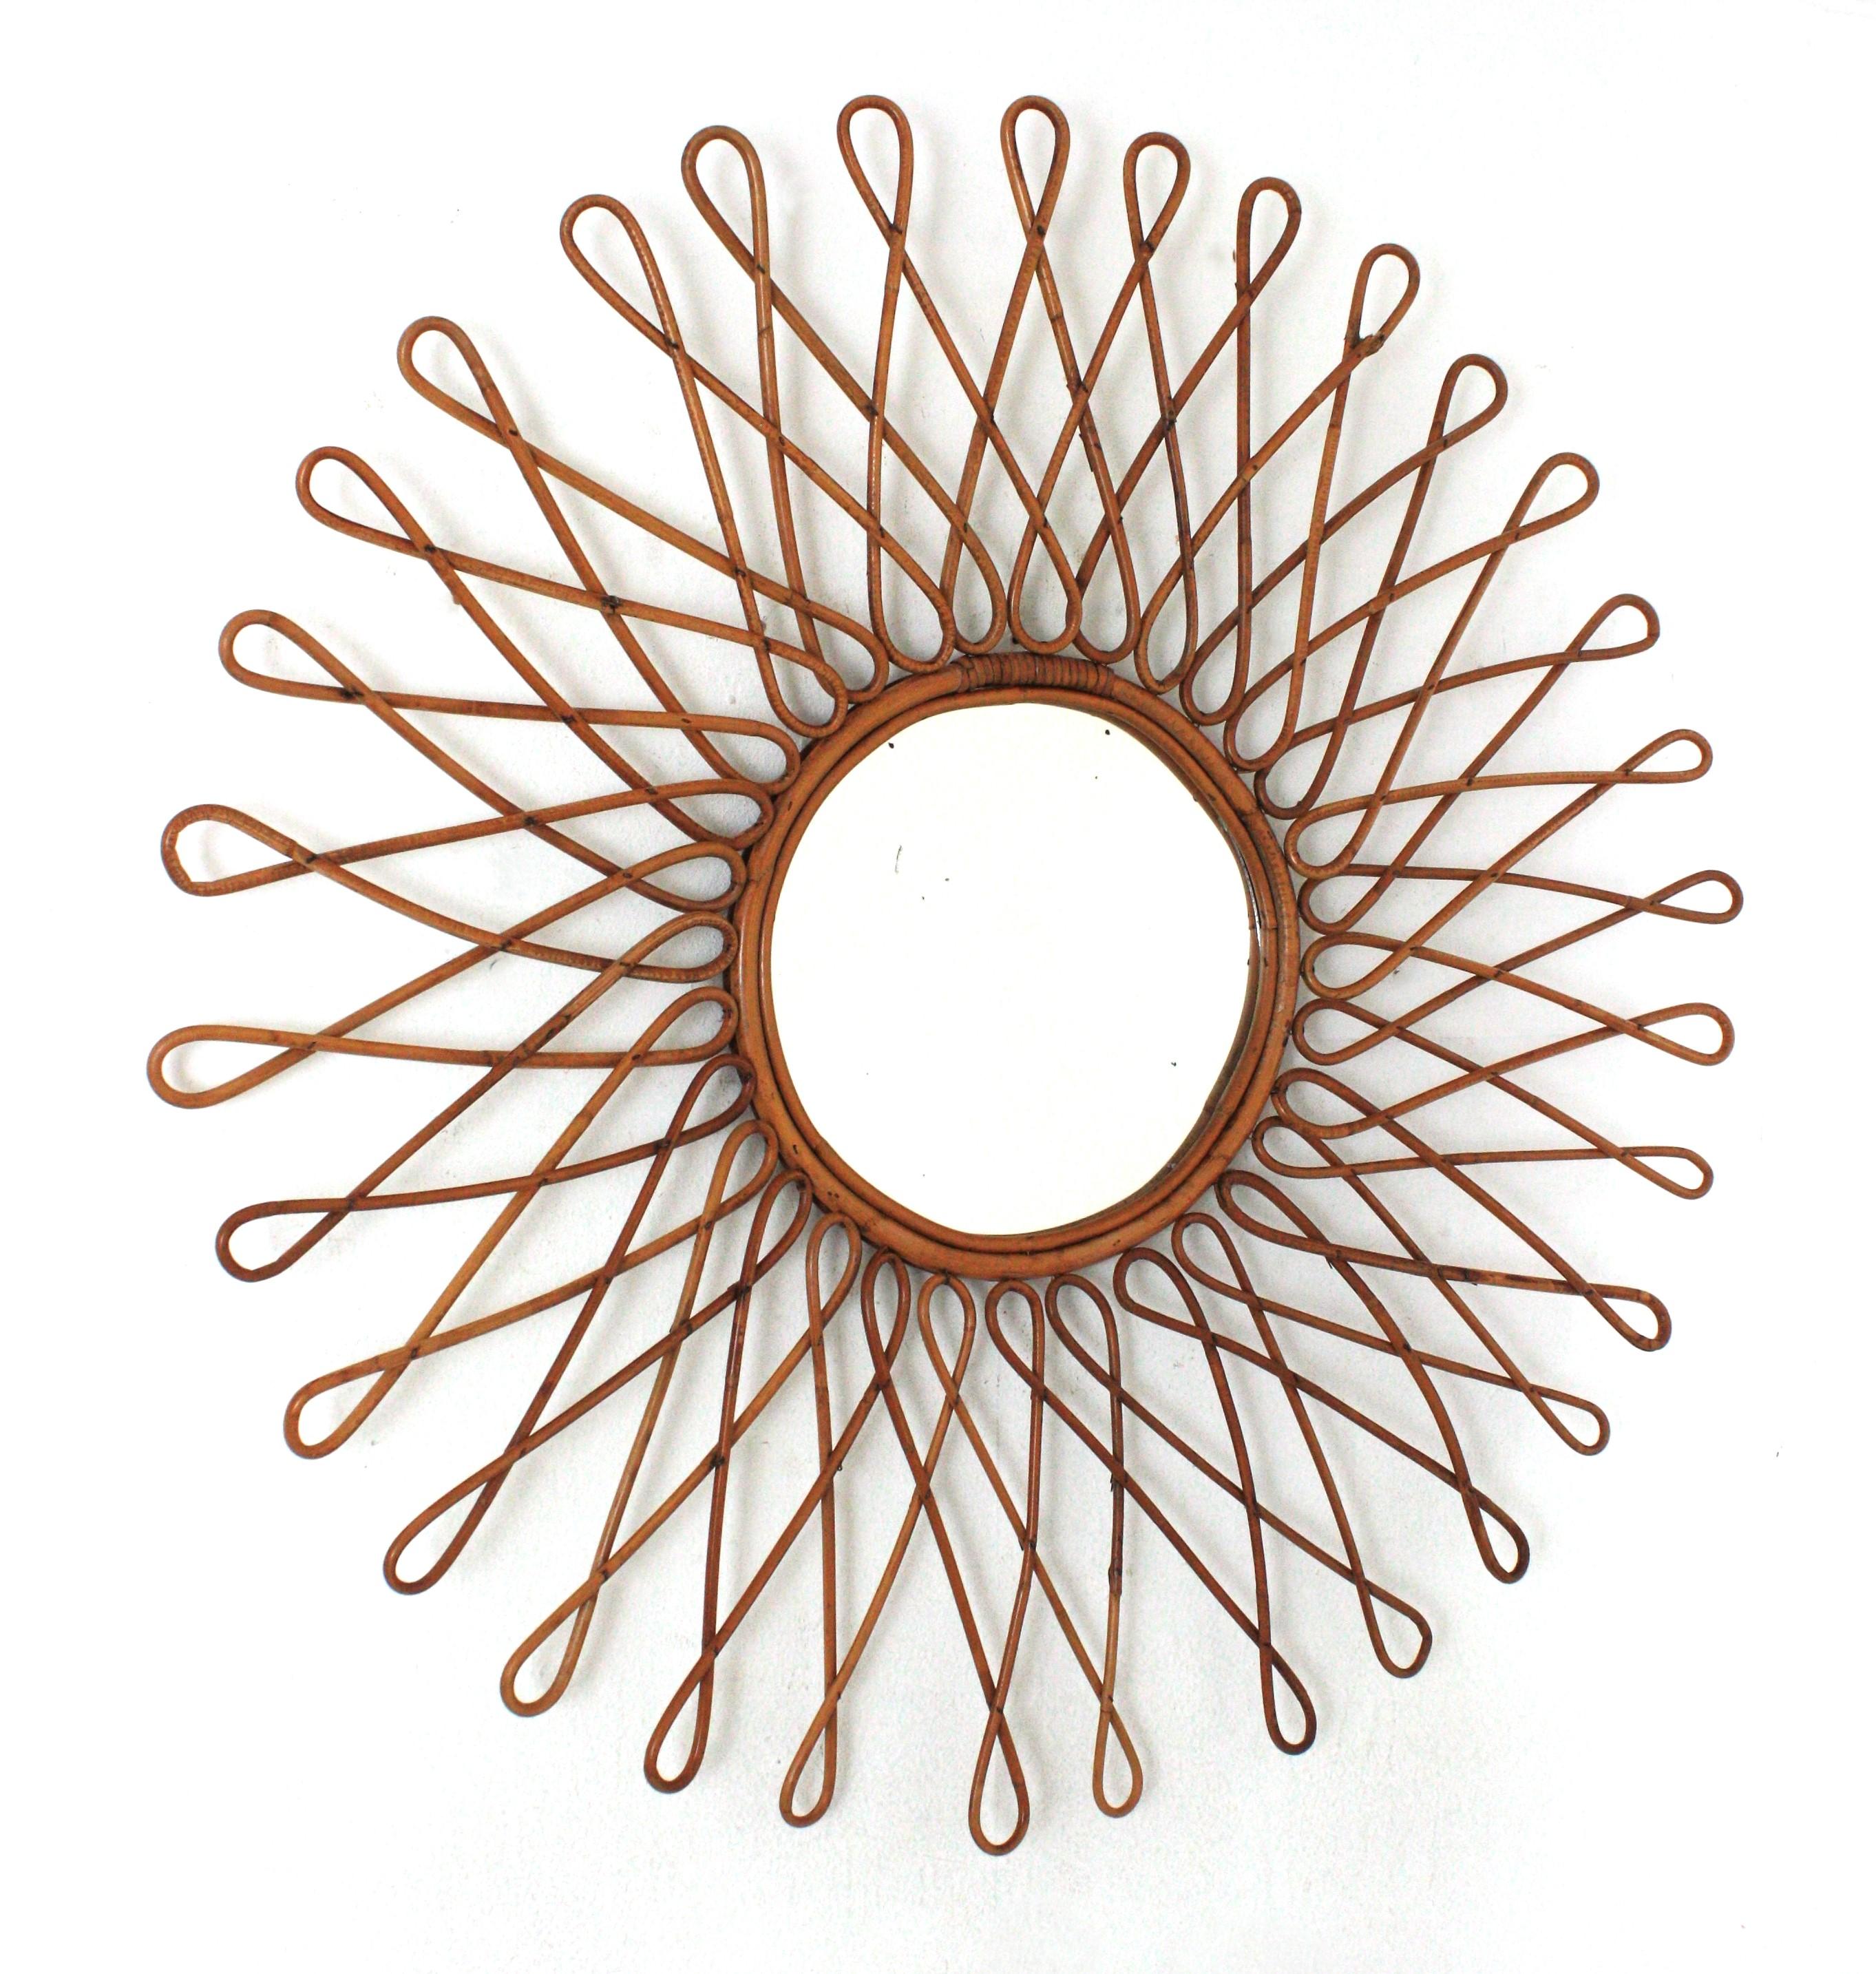 XXL Midcentury rattan sunburst starburst wall mirror. France, 1960s.
This mediterranean wall mirror features a round mirror glass framed by rattan canes with loop endings creating an eye-catching sunburst- starburst.
It has all the freshness and